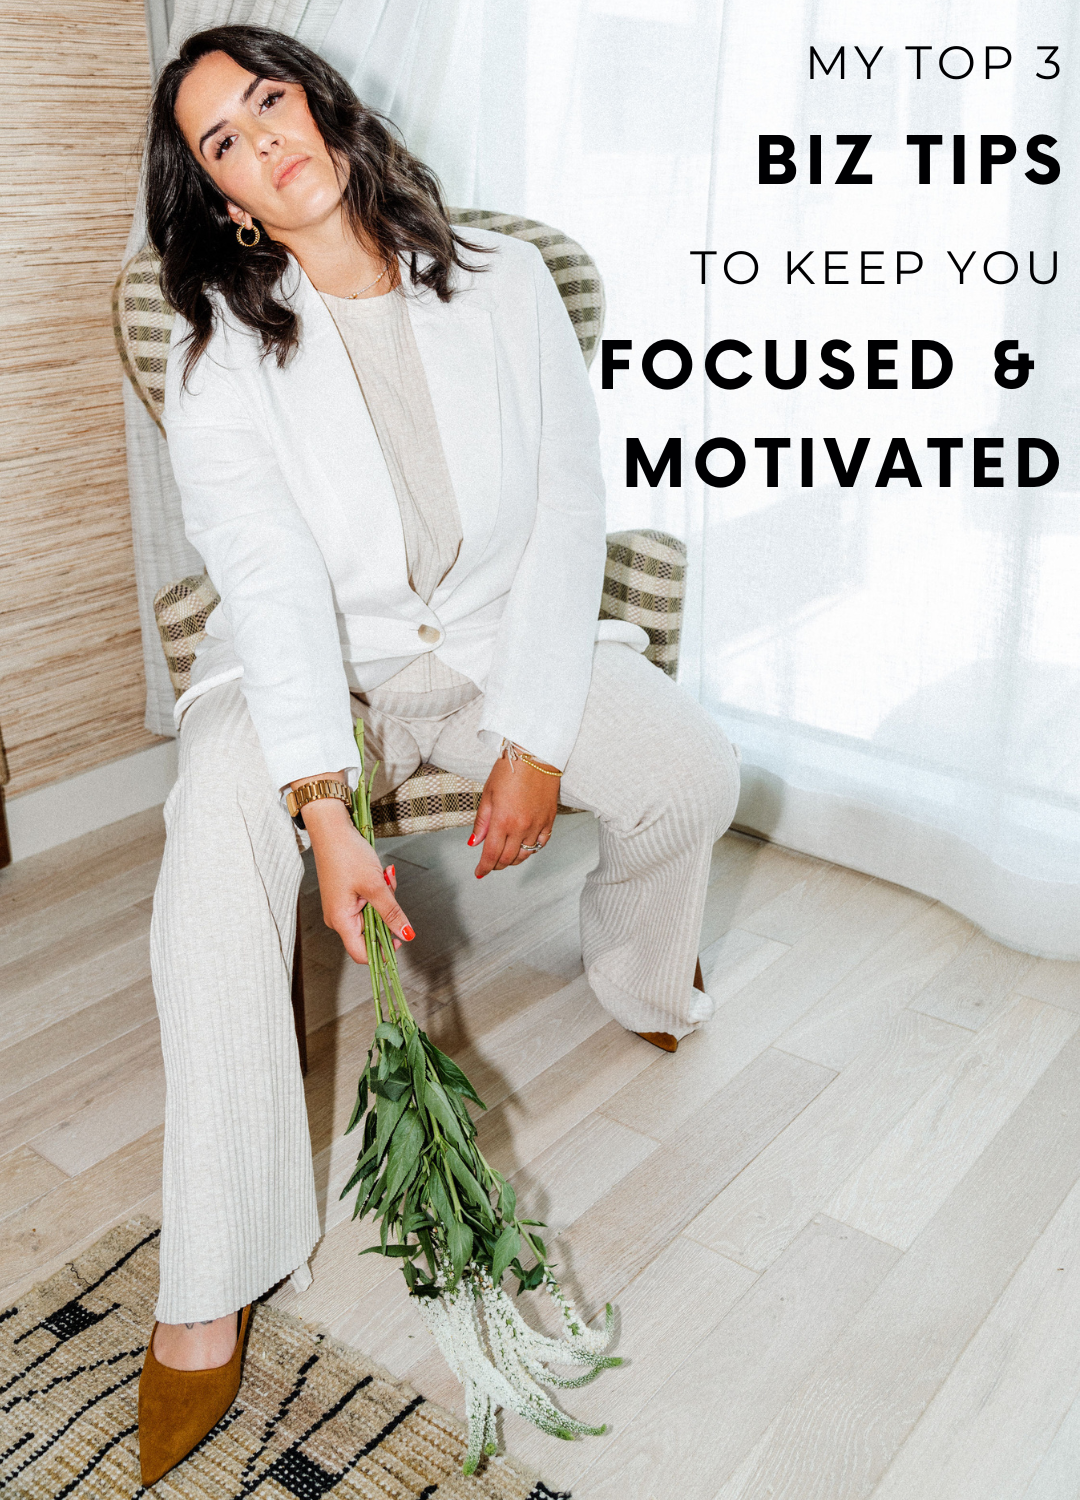 My Top 3 Biz Tips to keep you focused and motivated